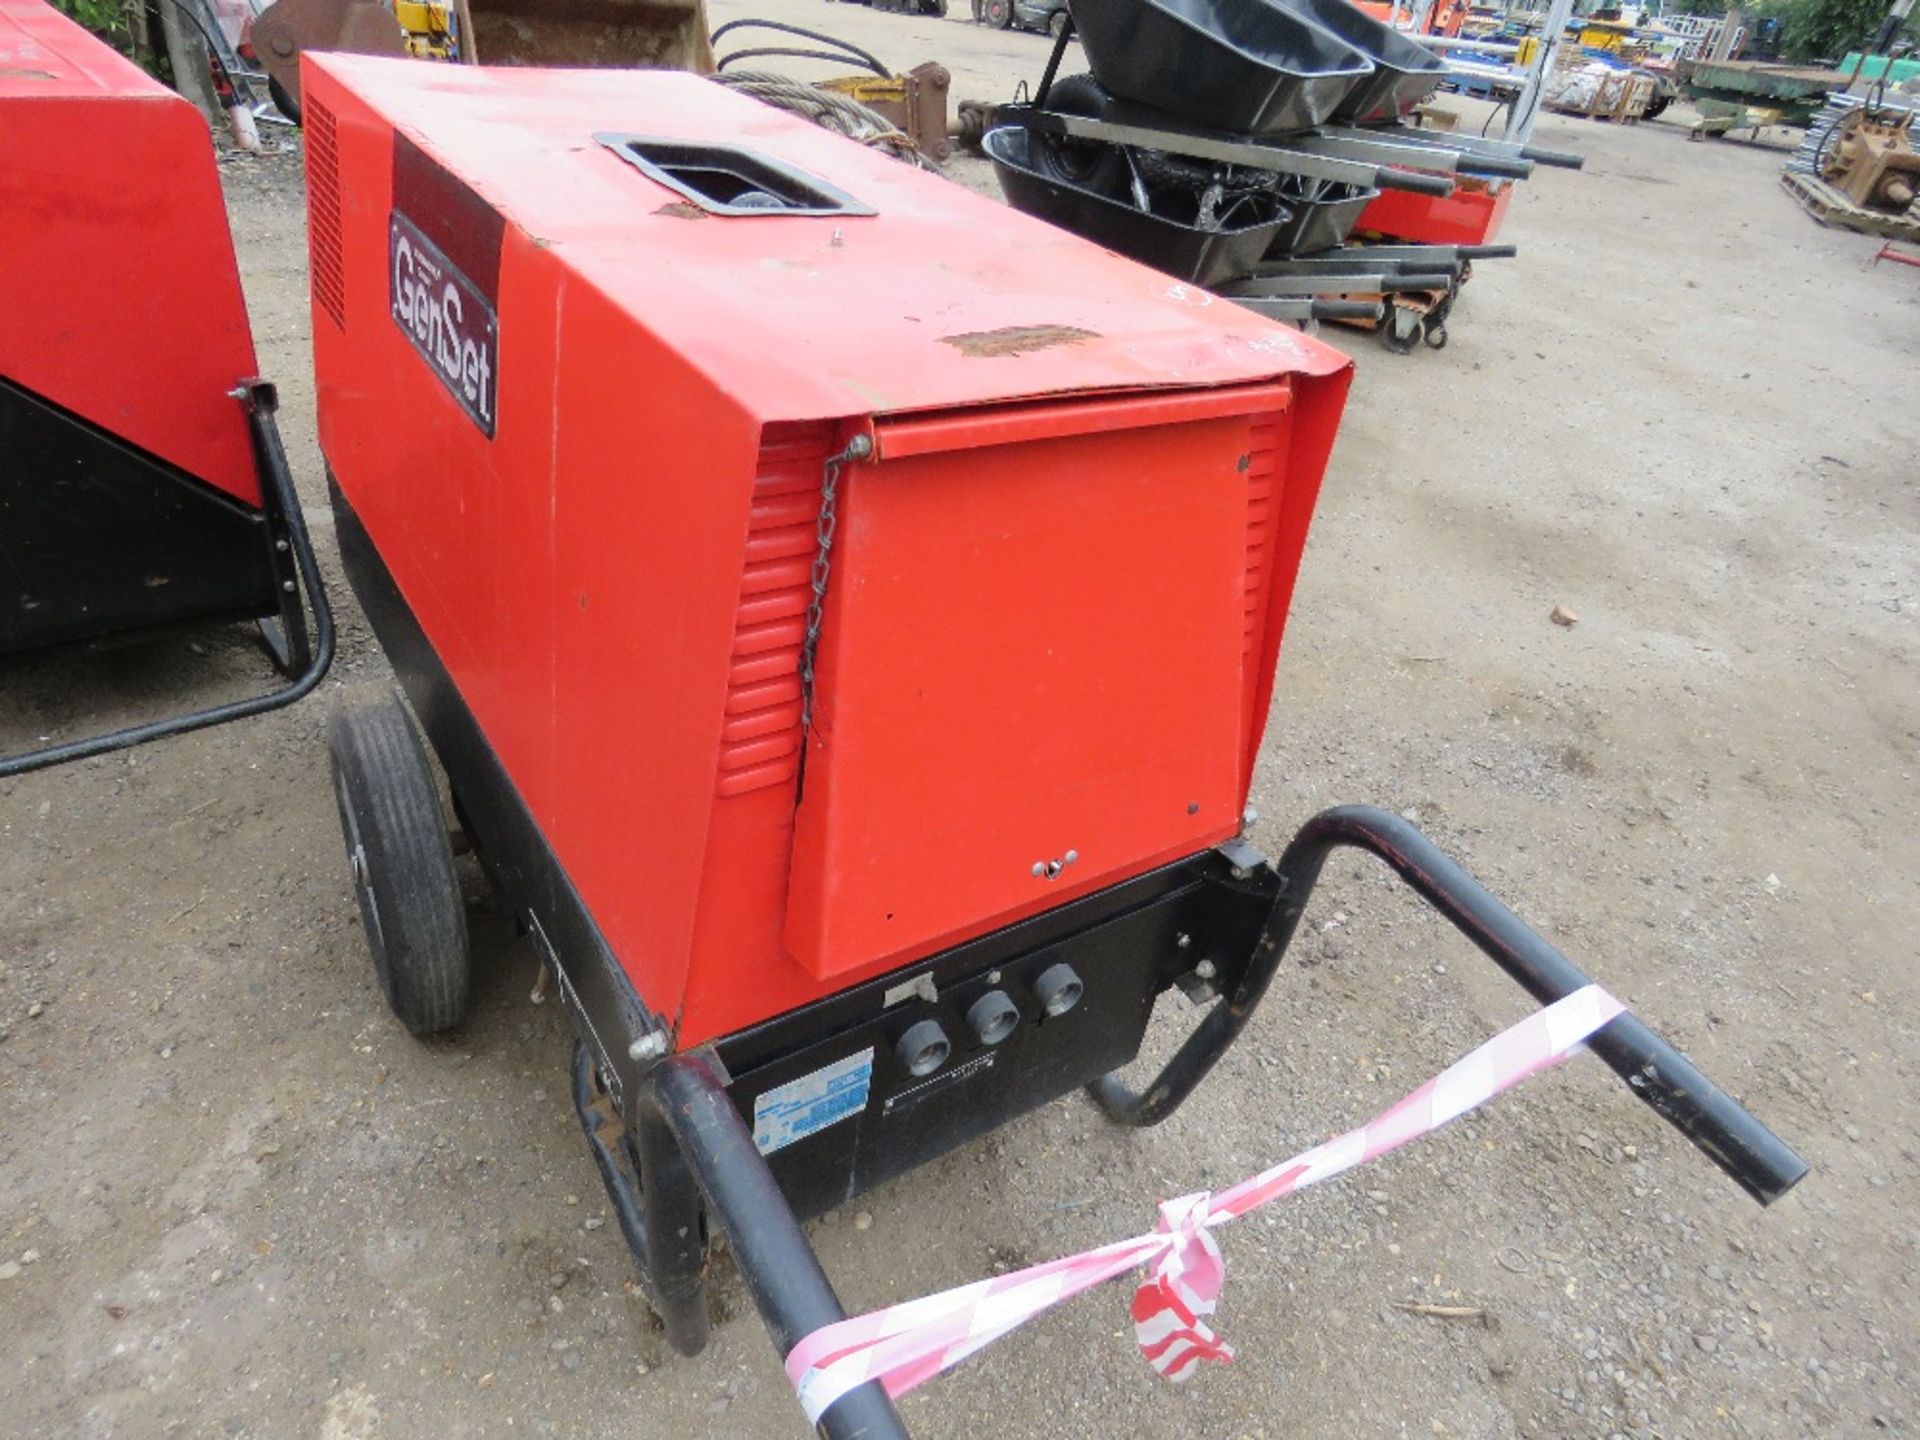 GENSET MPM 8/300 AMP WELDER GENERATOR. WHEN TESTED WAS SEEN TO TURN OVER BUT NOT START - Image 4 of 4